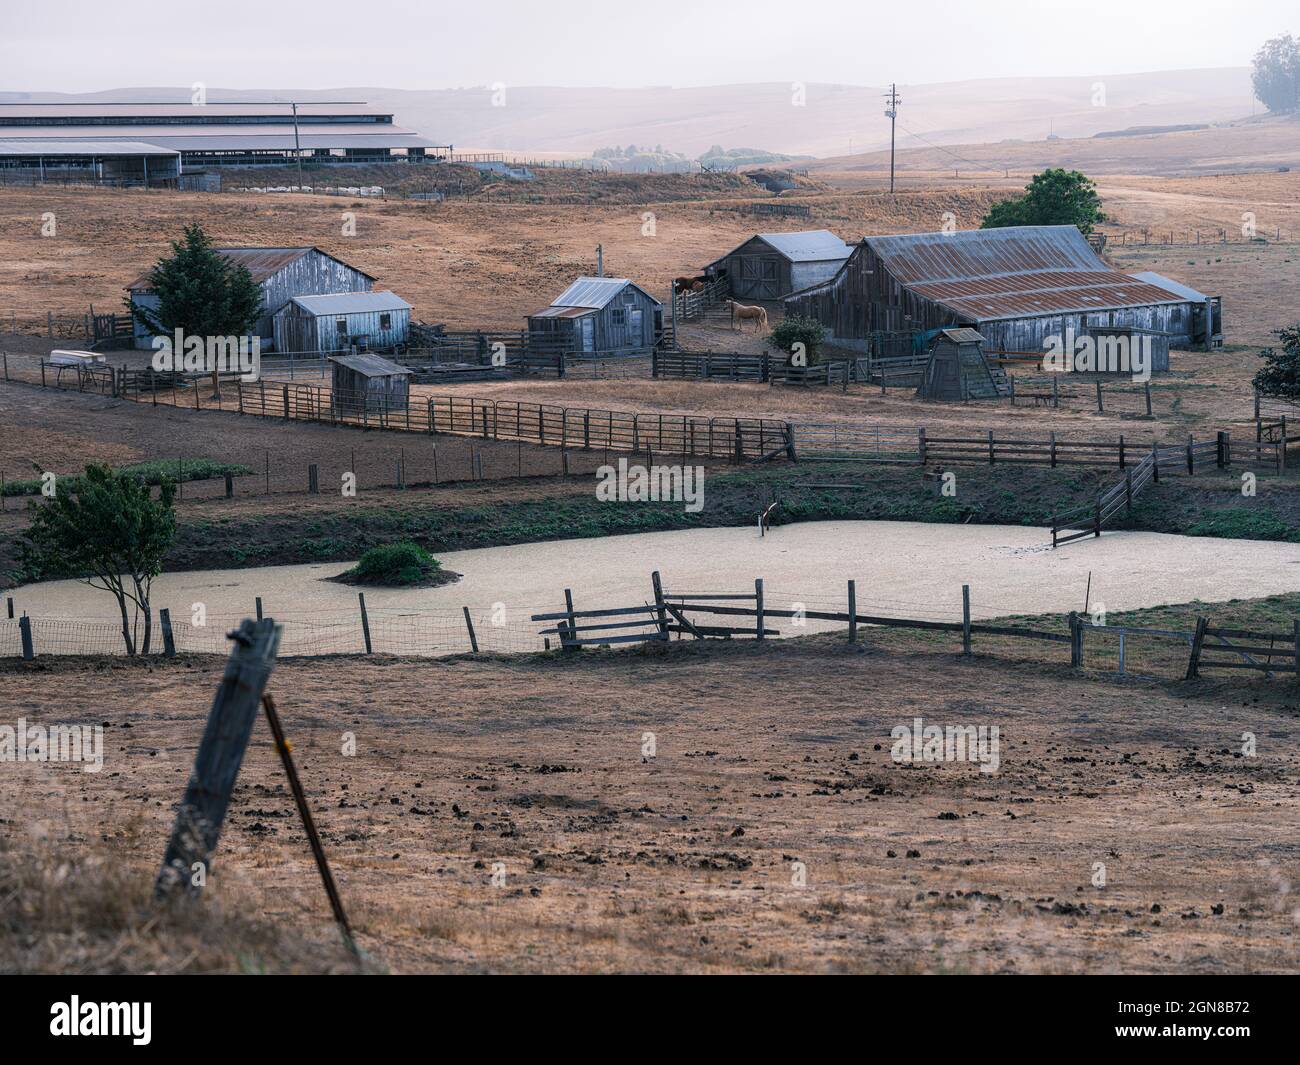 A country-western farm with horses and barn, quintessentially stunning. Stock Photo